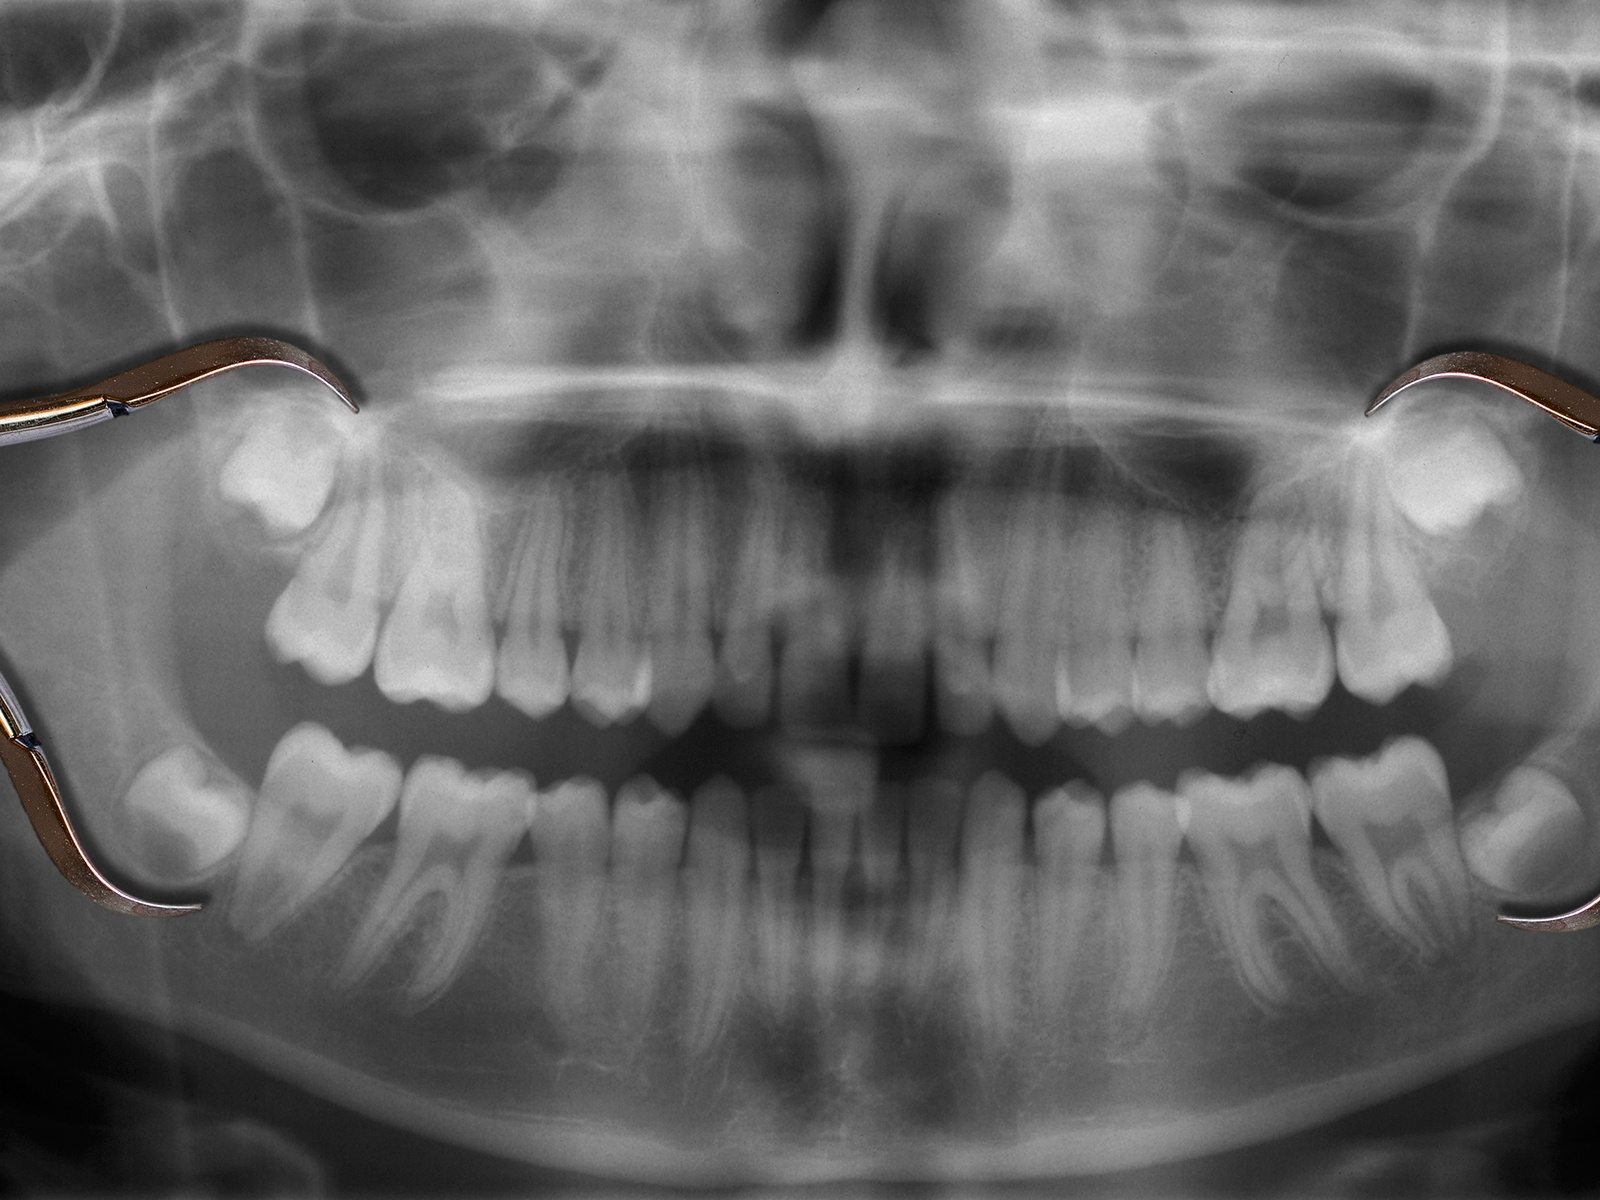 Do Wisdom Teeth need to be Removed?